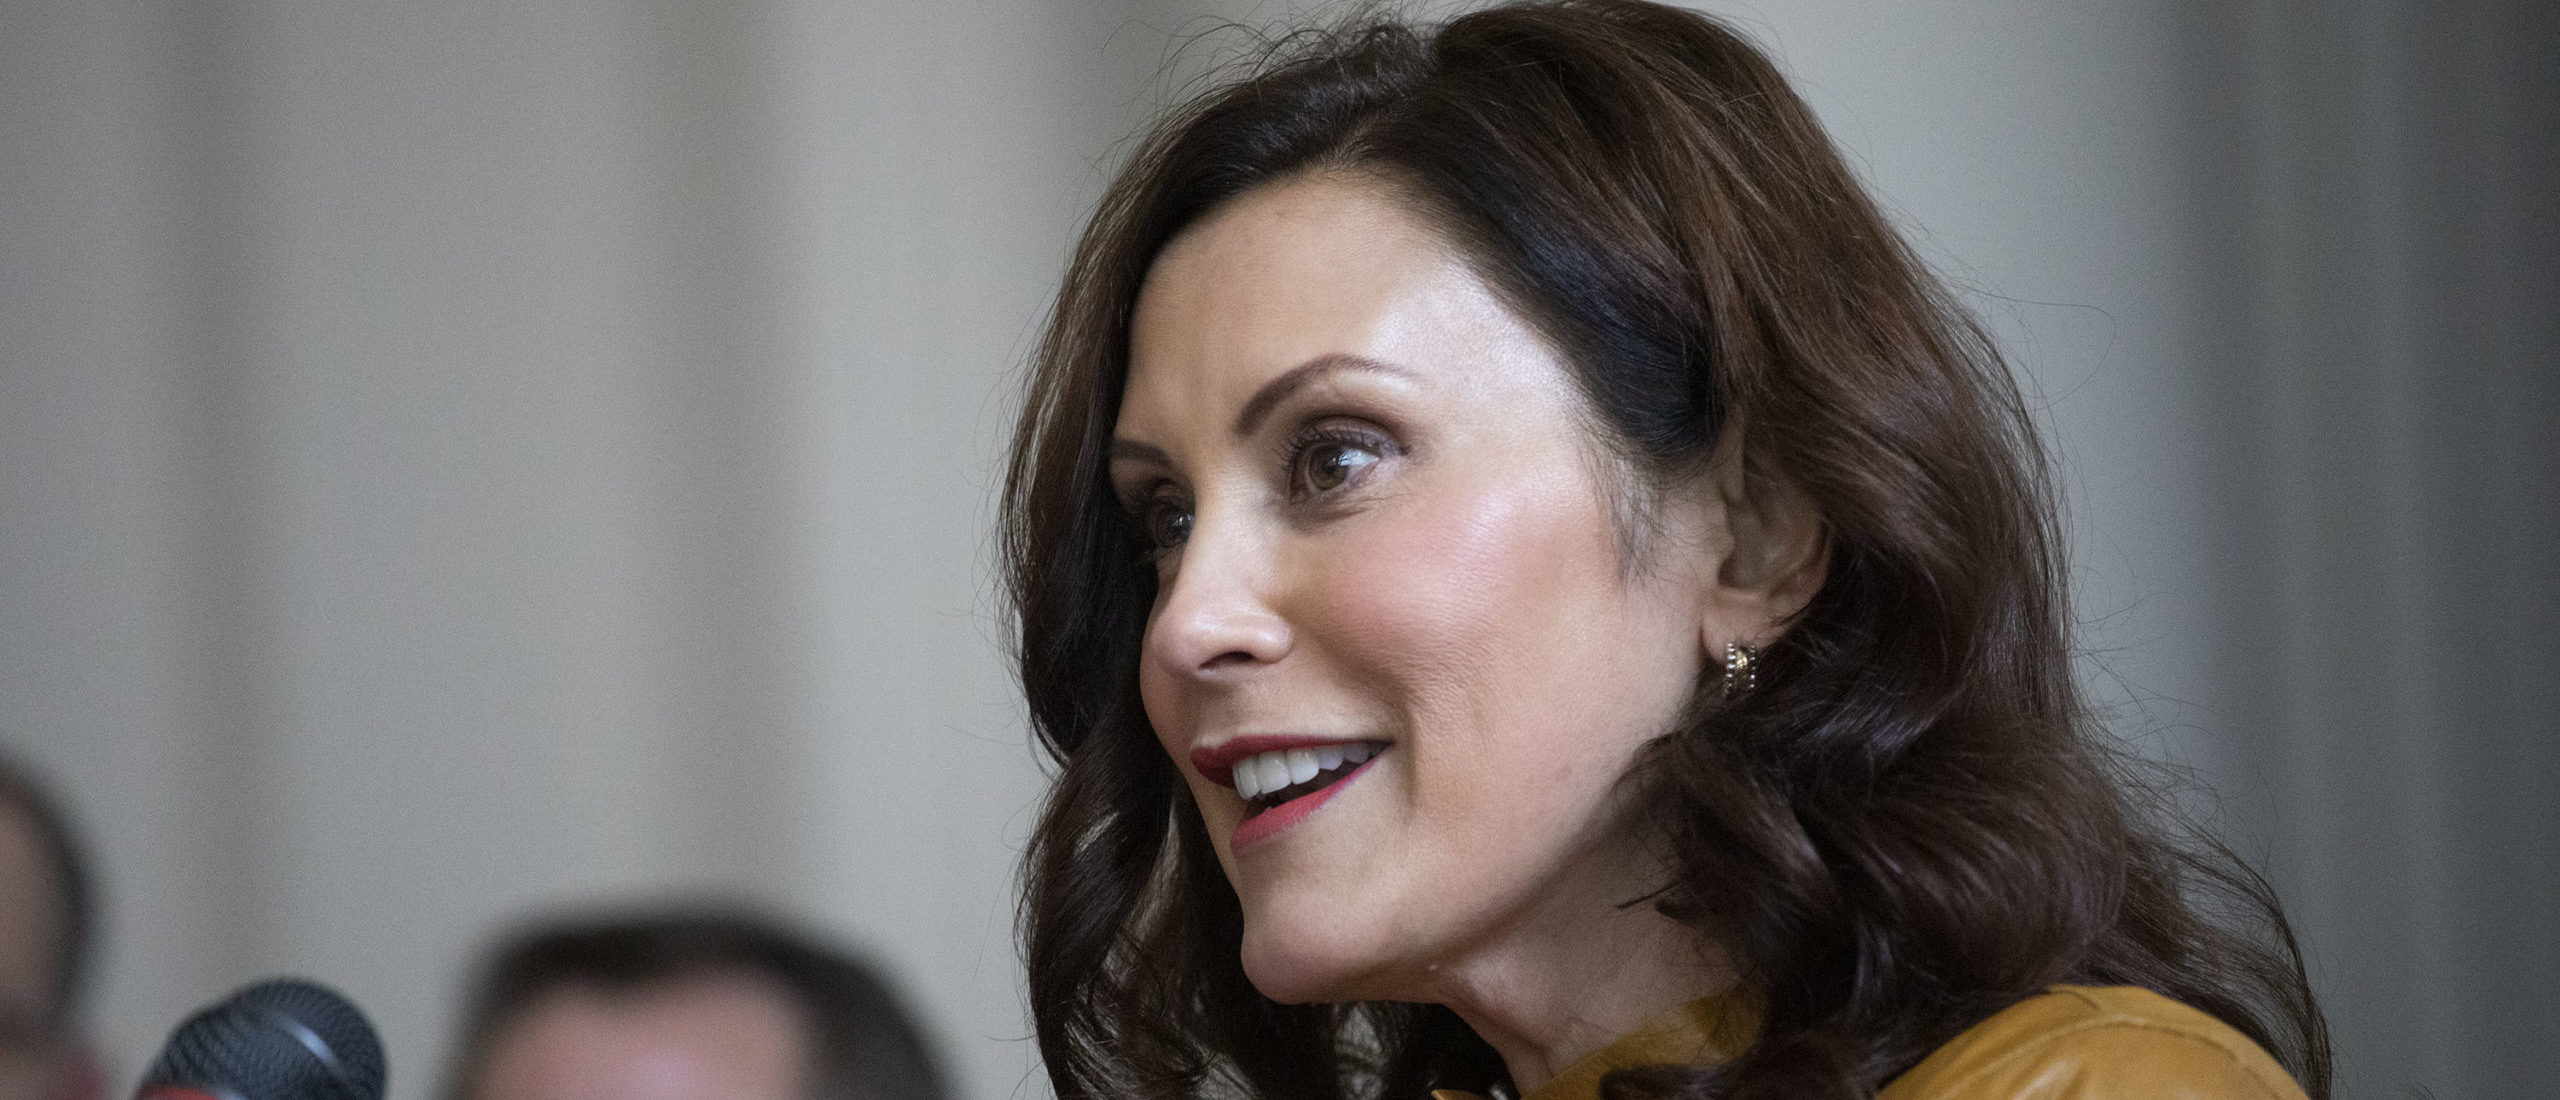 Michigan Governor Gretchen Whitmer announces new economic development projects at an event on October 5, 2022 in Grand Rapids, Michigan. The projects were the result of a bipartisan bill the Governor signed this week. (Photo by Bill Pugliano/Getty Images)